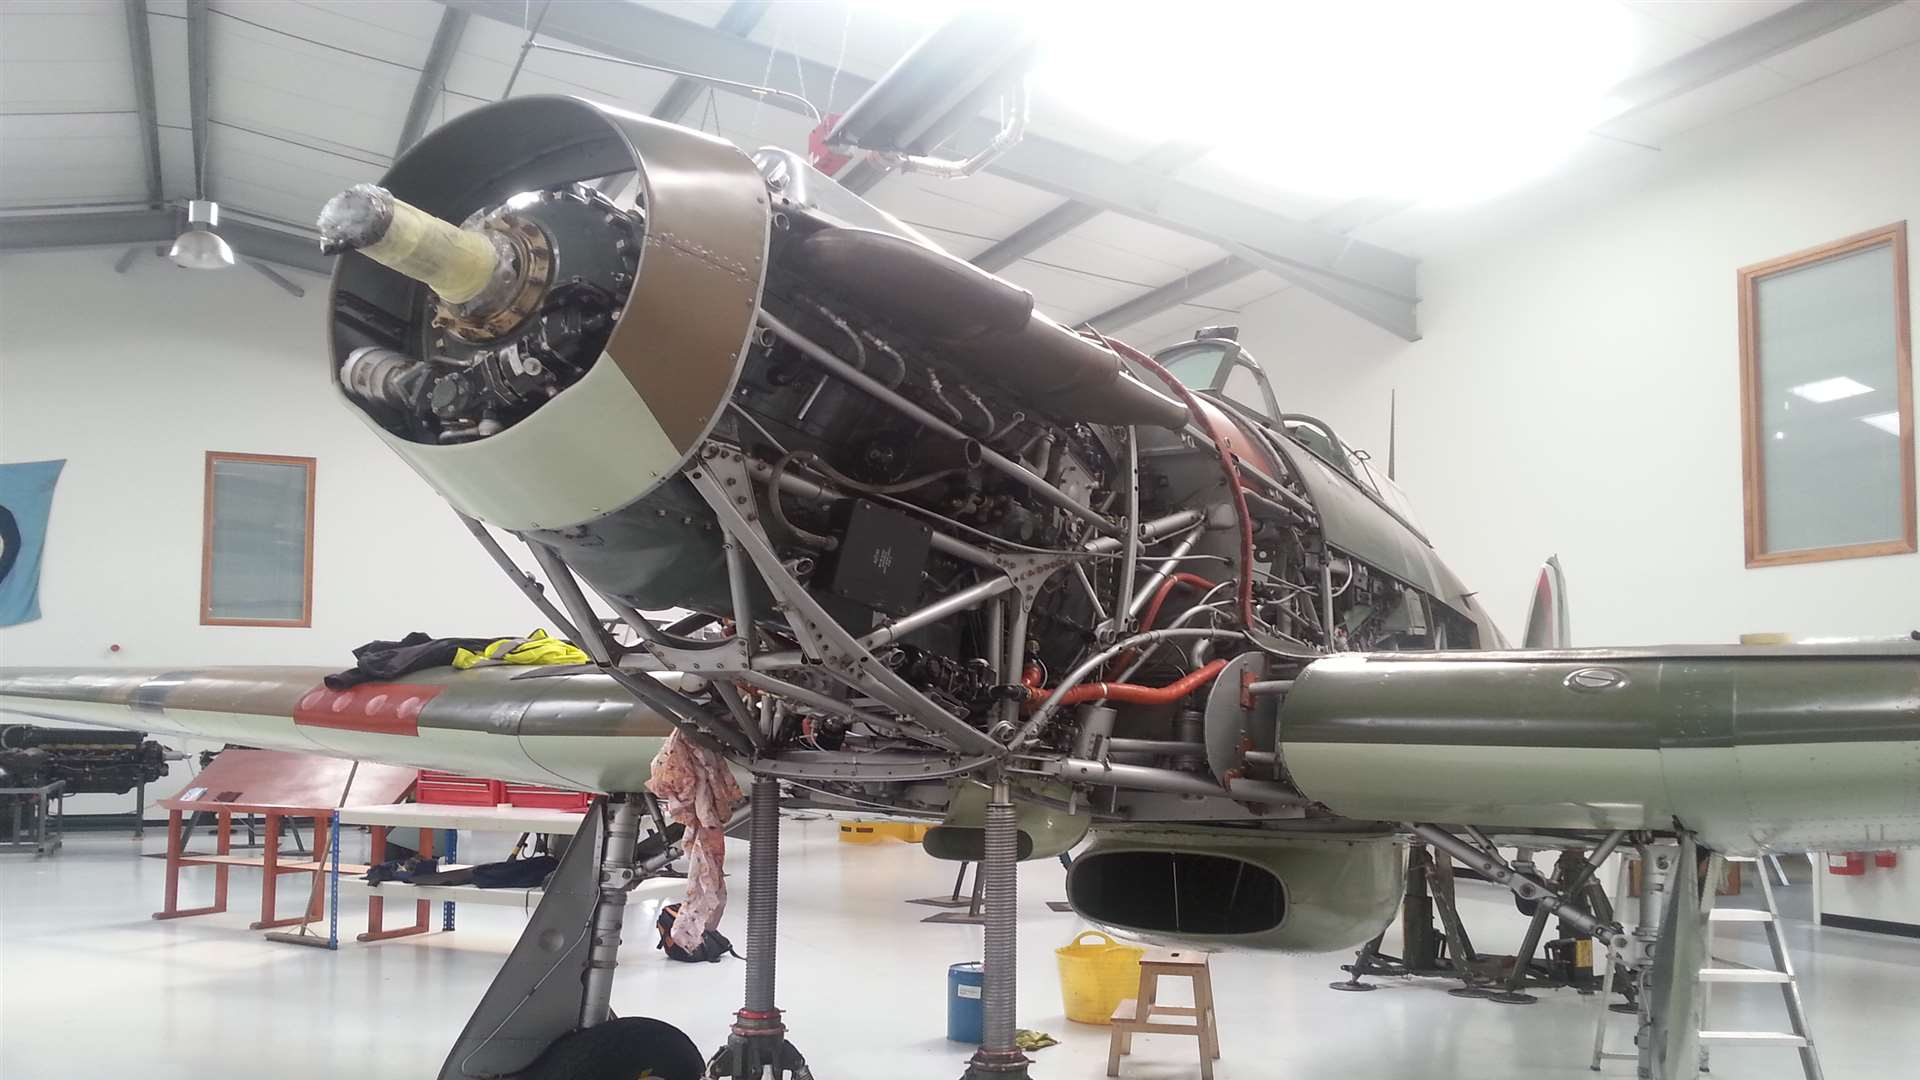 A Spitfire being worked on